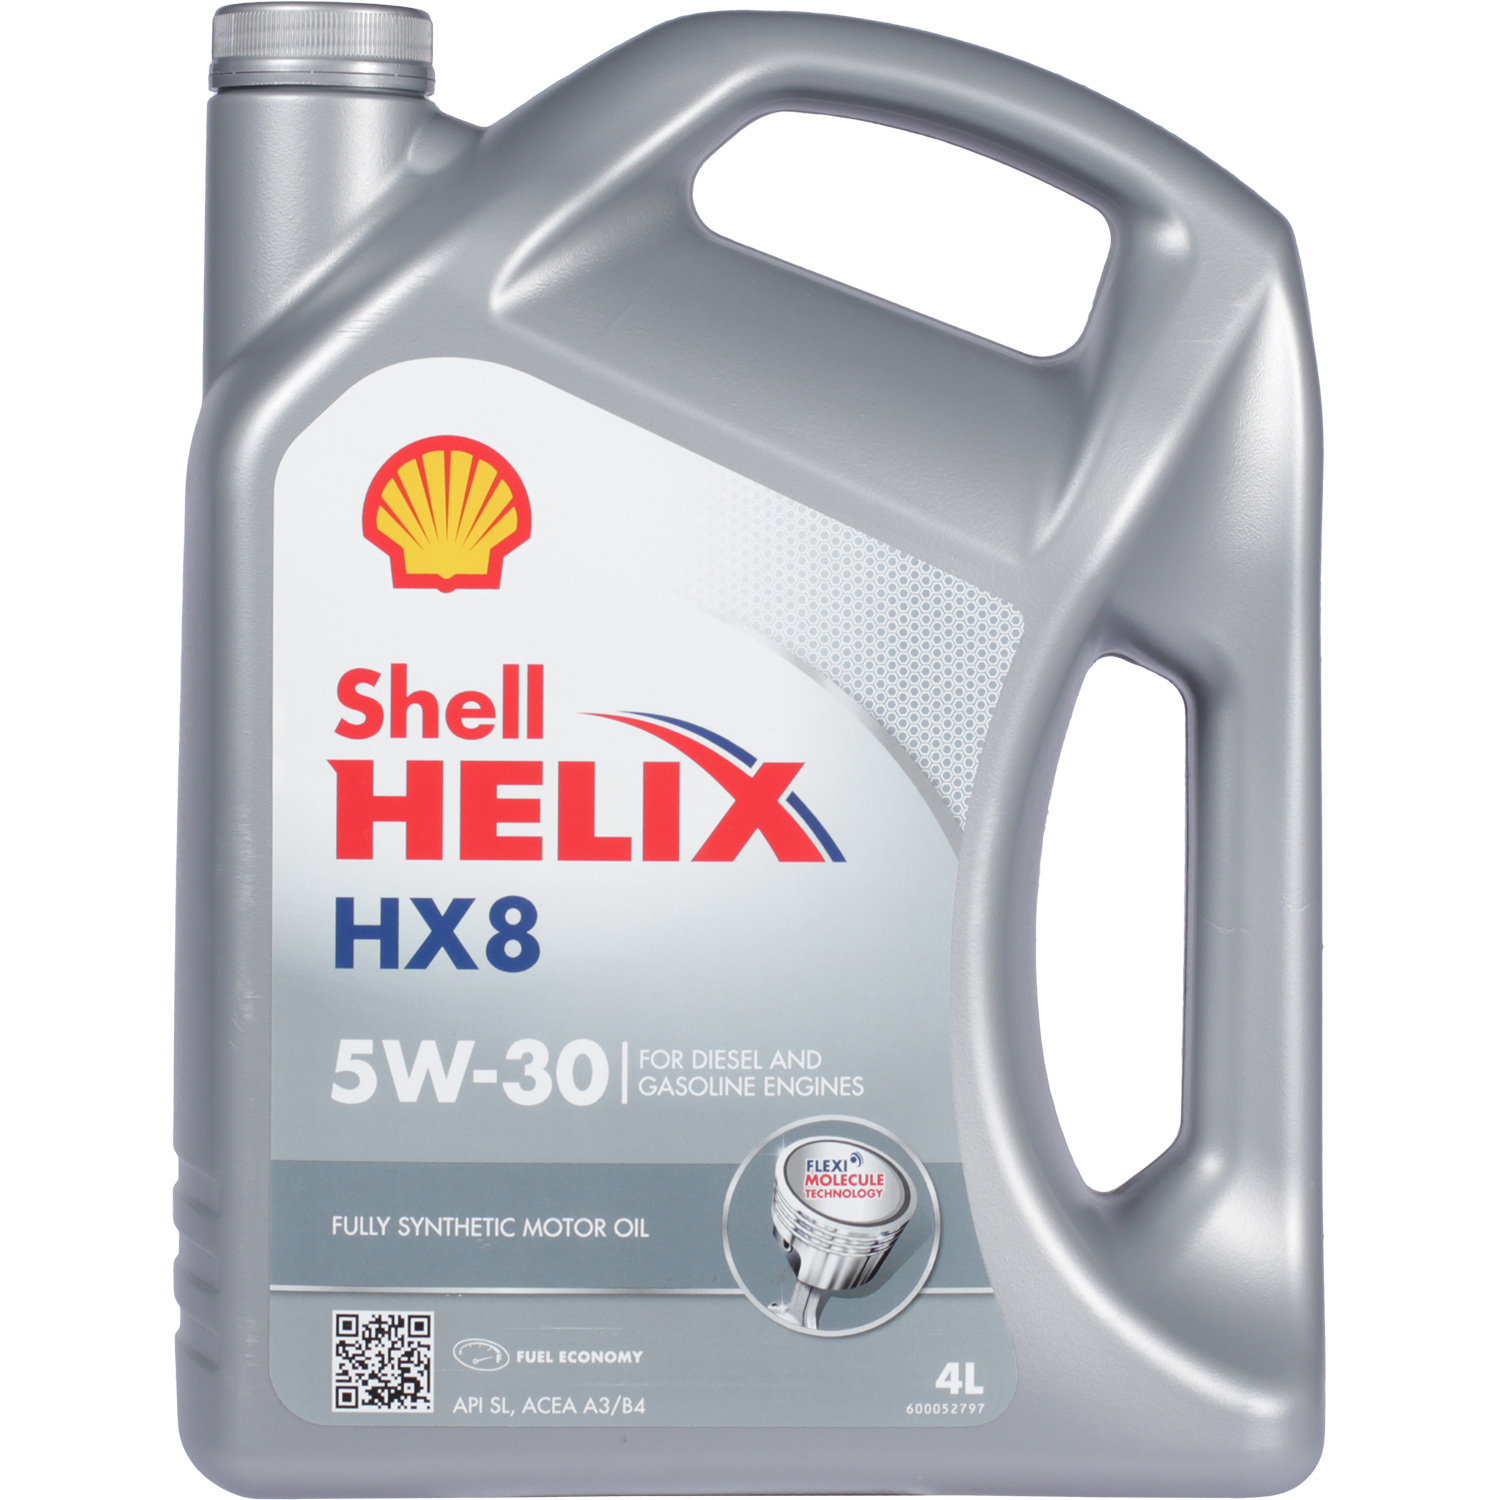 Shell Моторное масло Shell Helix HX8 5W-30, 4 л масло моторное shell helix ultra 5w 40 1 л